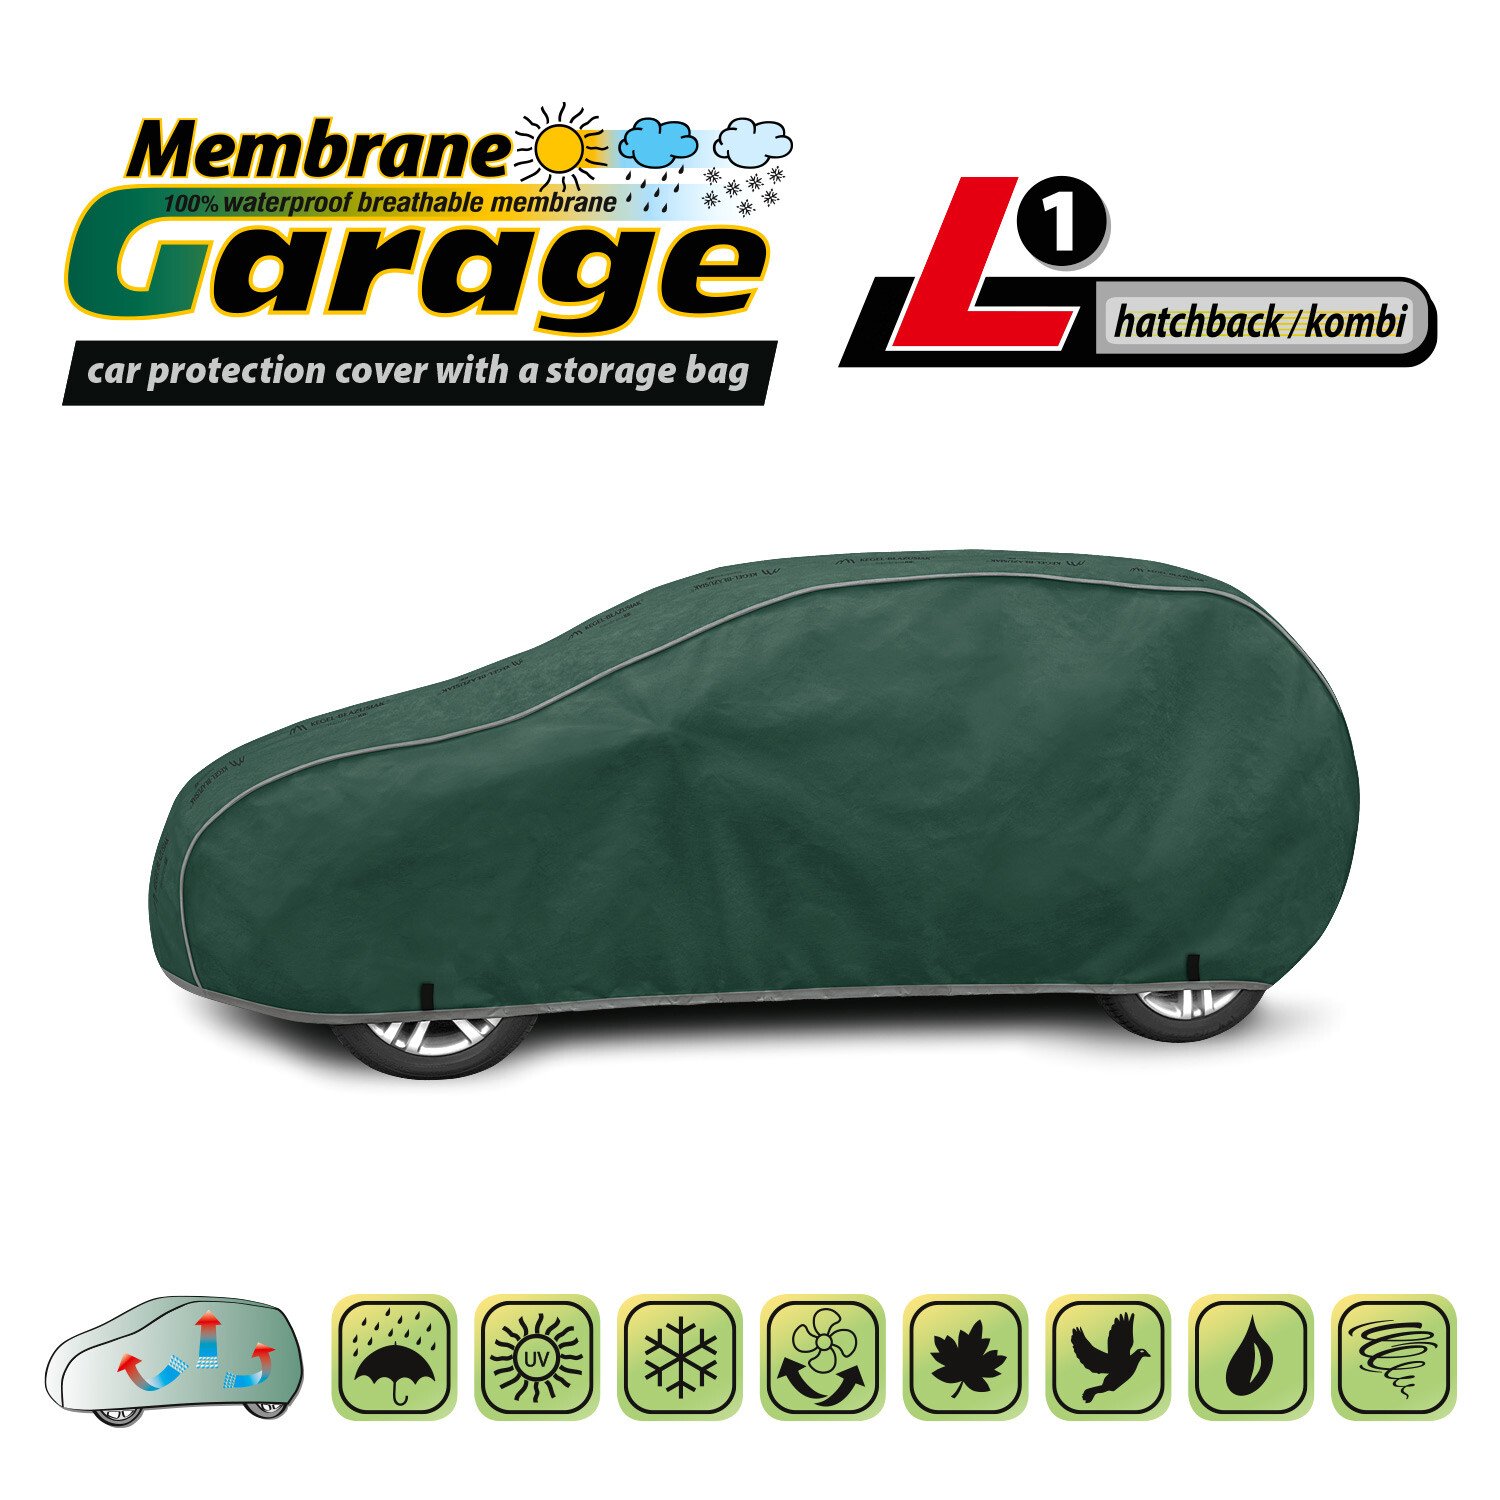 Membrane Garage full car cover, completely waterproof and breathable - L1 - Hatchback/Kombi thumb